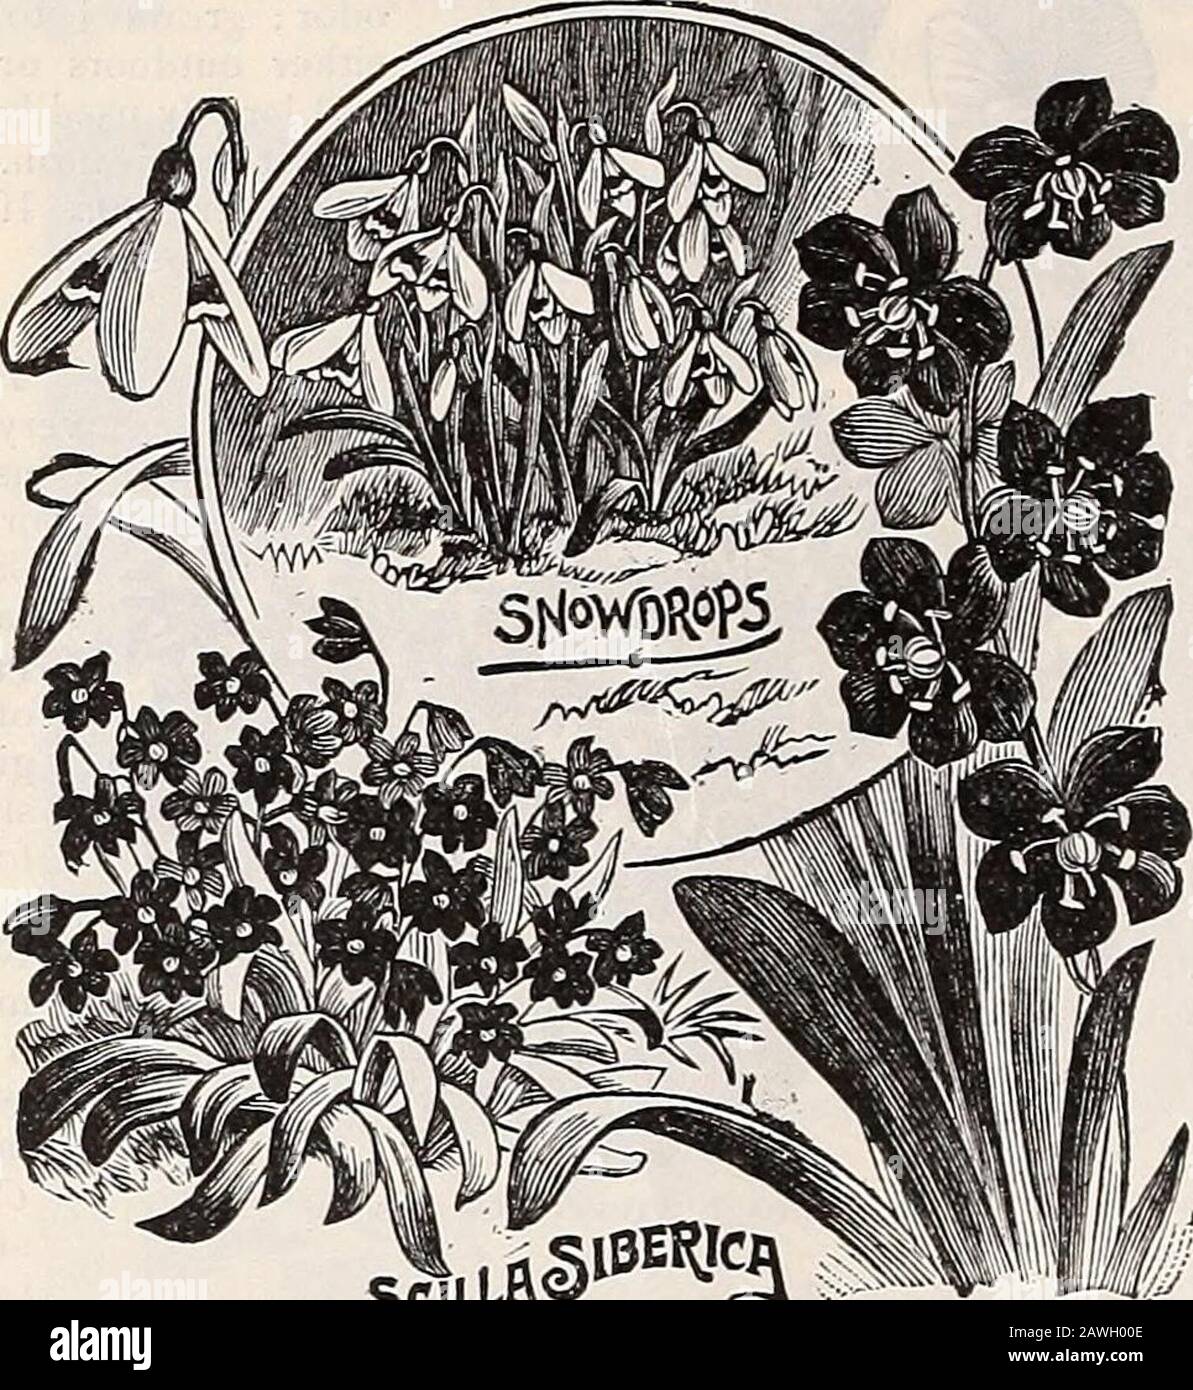 Dreer's autumn catalogue : 1899 bulbs plants, seeds, etc . all of these bulbs. They shouldnot be disturbed often if a fine display is desired. ElAves* Giant Snowdrop- ( Galafithus Ekvesi). An exceed-ingly large and beautiful singlevariety; flowers snow wlite, withemerald-green tube. 3 for 5 cts.,15 cts. per doz., §1.00 per 100,§7.00 per 1000.Sing-le Snowdrop {Ga/nfif/ius Jiivaiis). Pure white gracefulbells; early flowering. 3 for 5cts., 15 cts. per doz., §1.00 per100, $7.00 per 1000.Double Snowdrop {Galan- tJiKs nivalis Jl. pL). Flowers-perfectly double, pure white. 3for 10 cts., 25 cts. per d Stock Photo